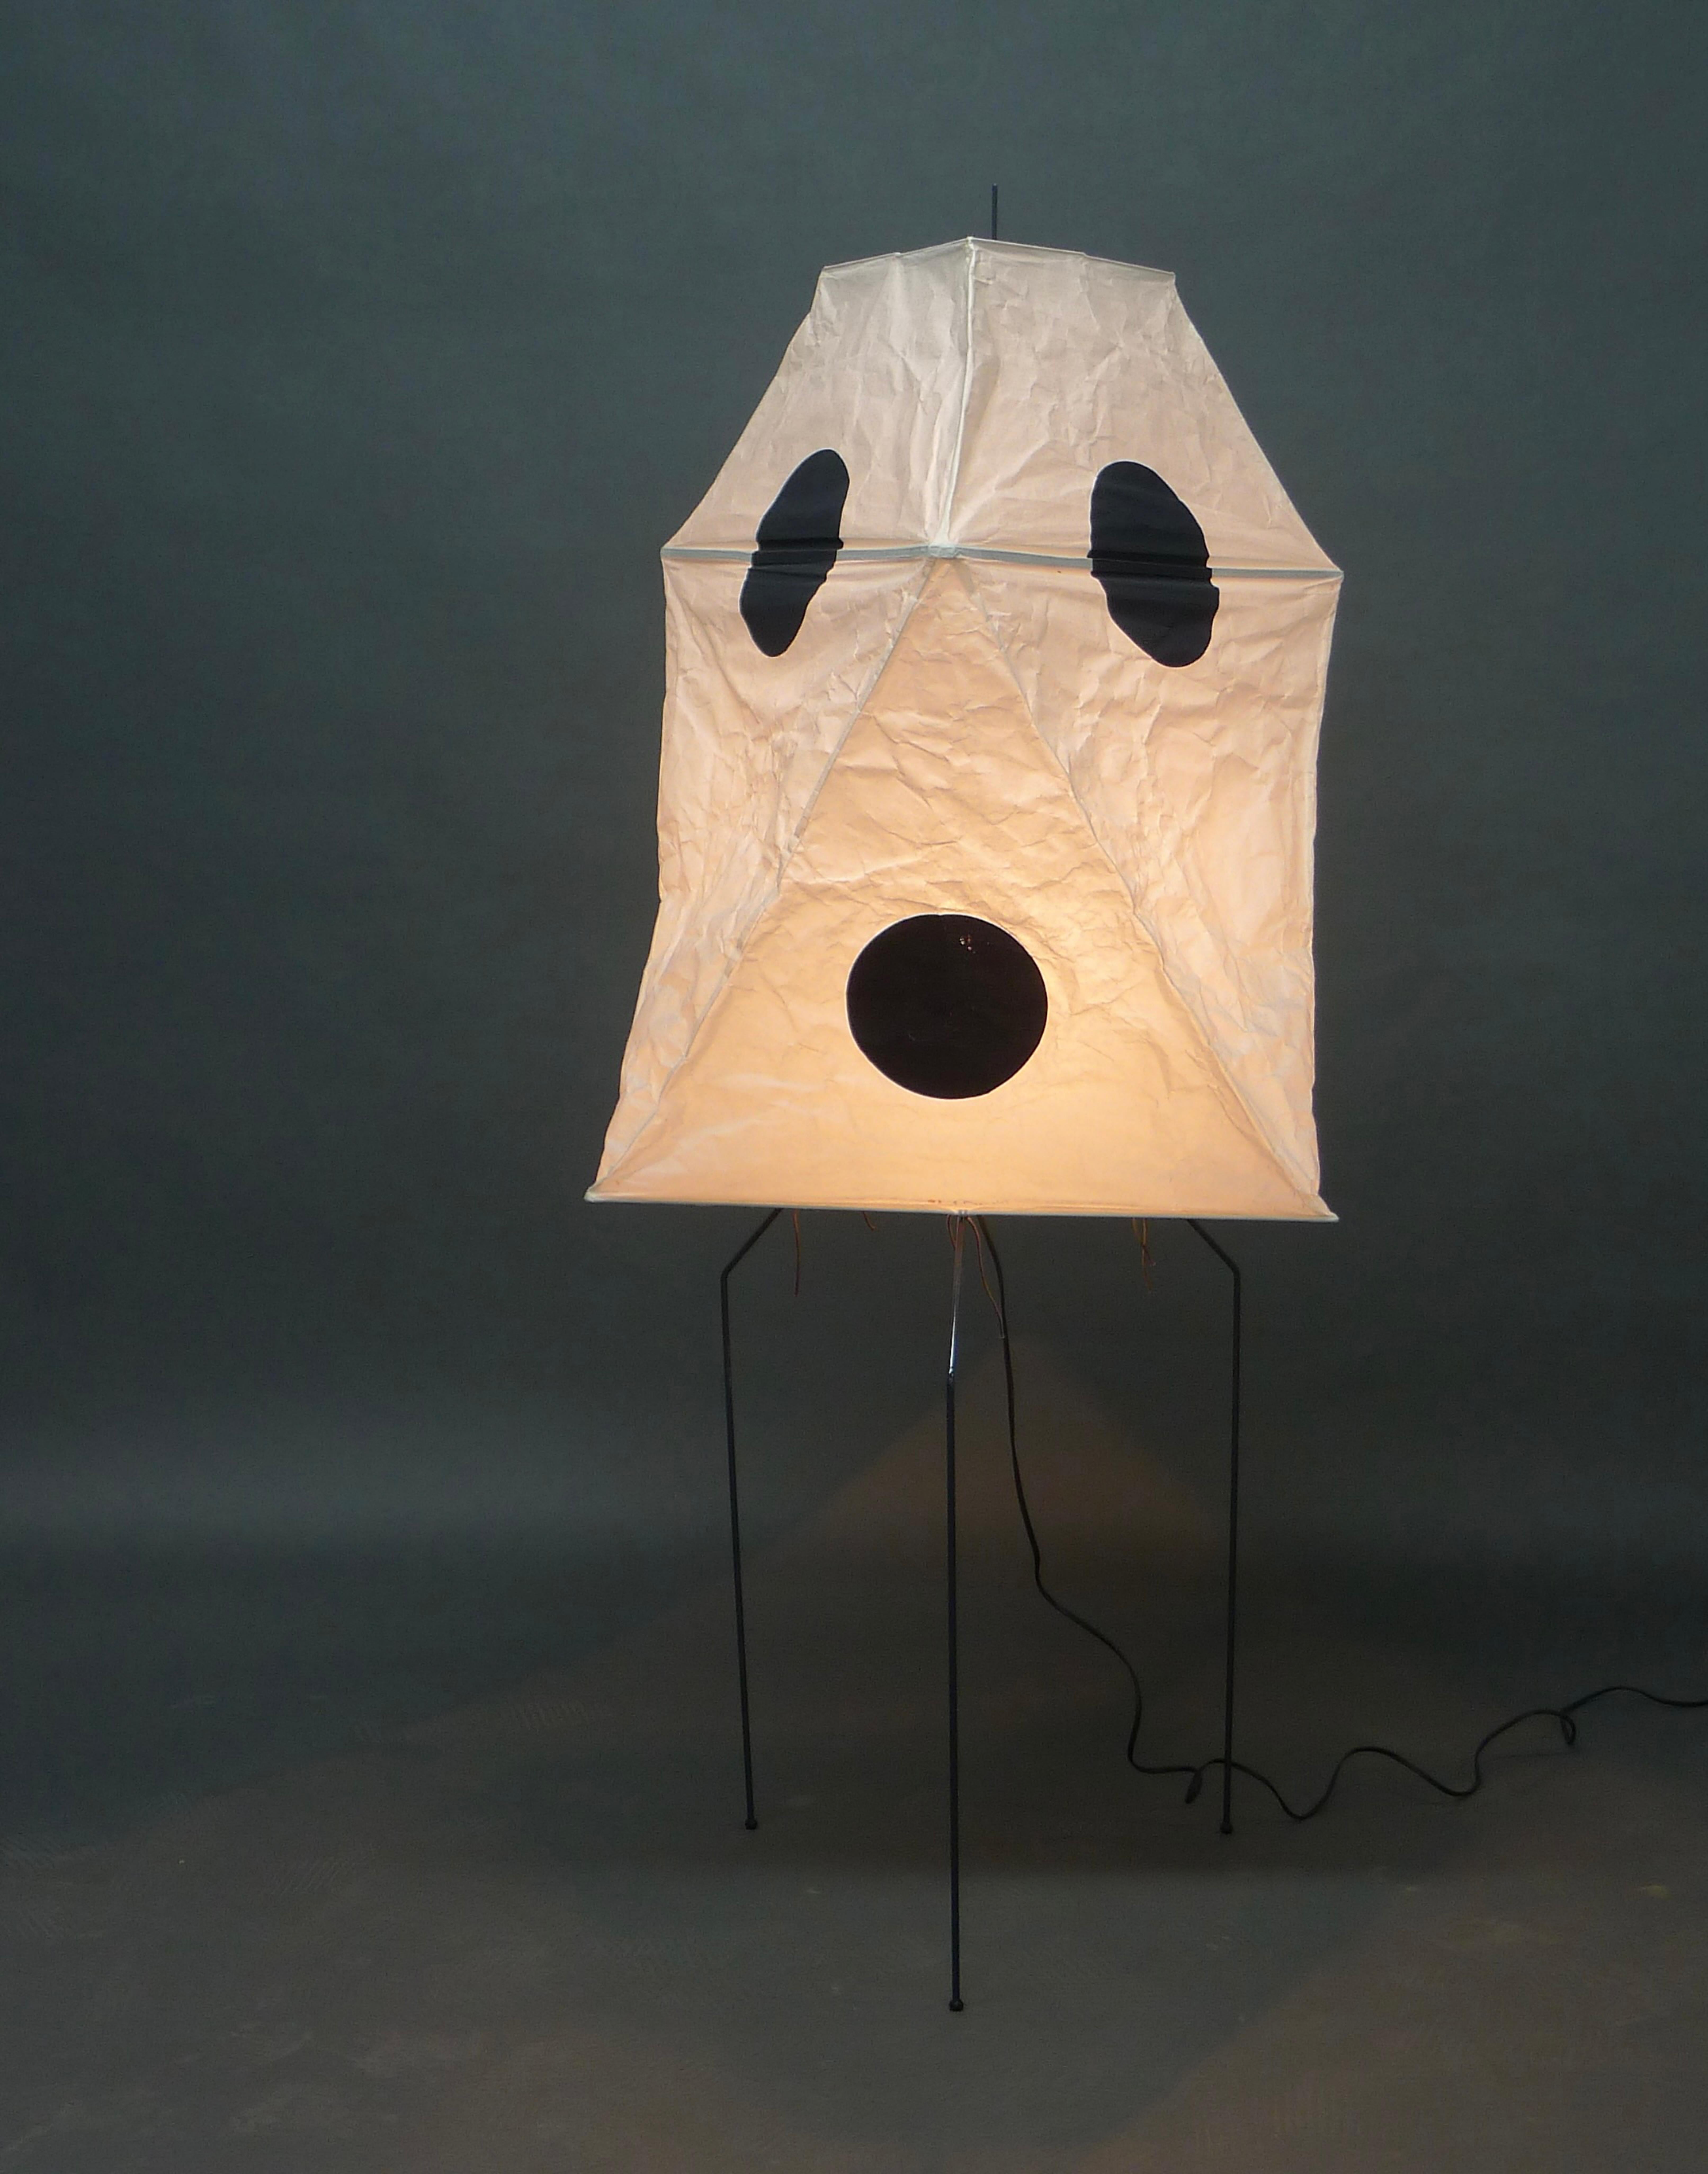 An Akari light sculpture, model UF3-Q, designed by Isamu Noguchi in 1951, and manufactured by Ozeki & Co. in Gifu, Japan.  

Comprising a coated metal folding tripod base, with removable washi paper shade, the six sides given structure by internal